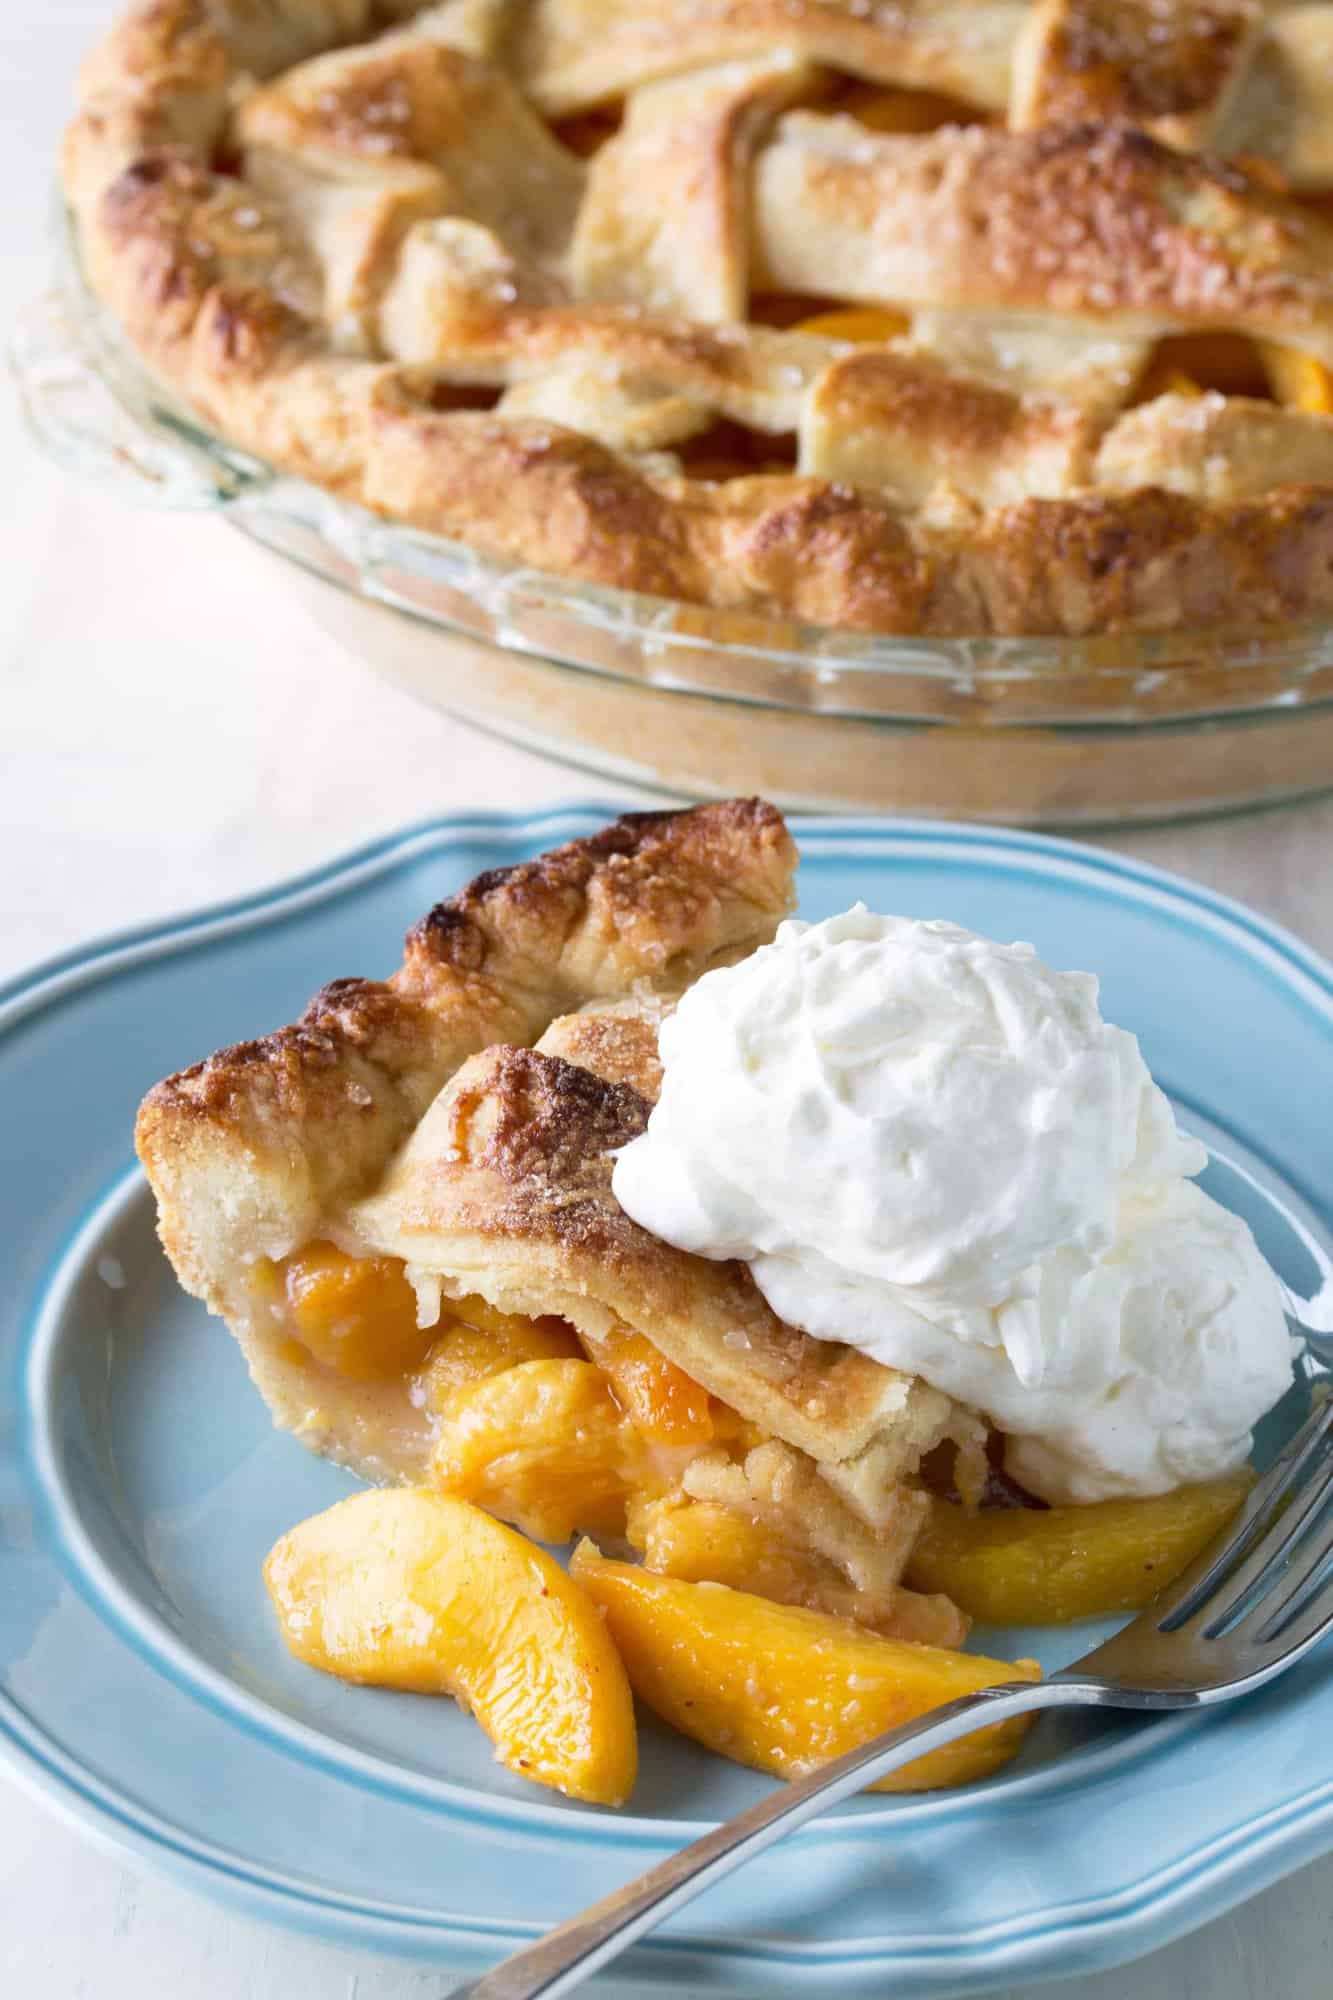 The perfect peach pie is within your grasp. A vibrant, sweet peach filling surrounded by a perfect fail-proof crust. It's all about the secret ingredient.